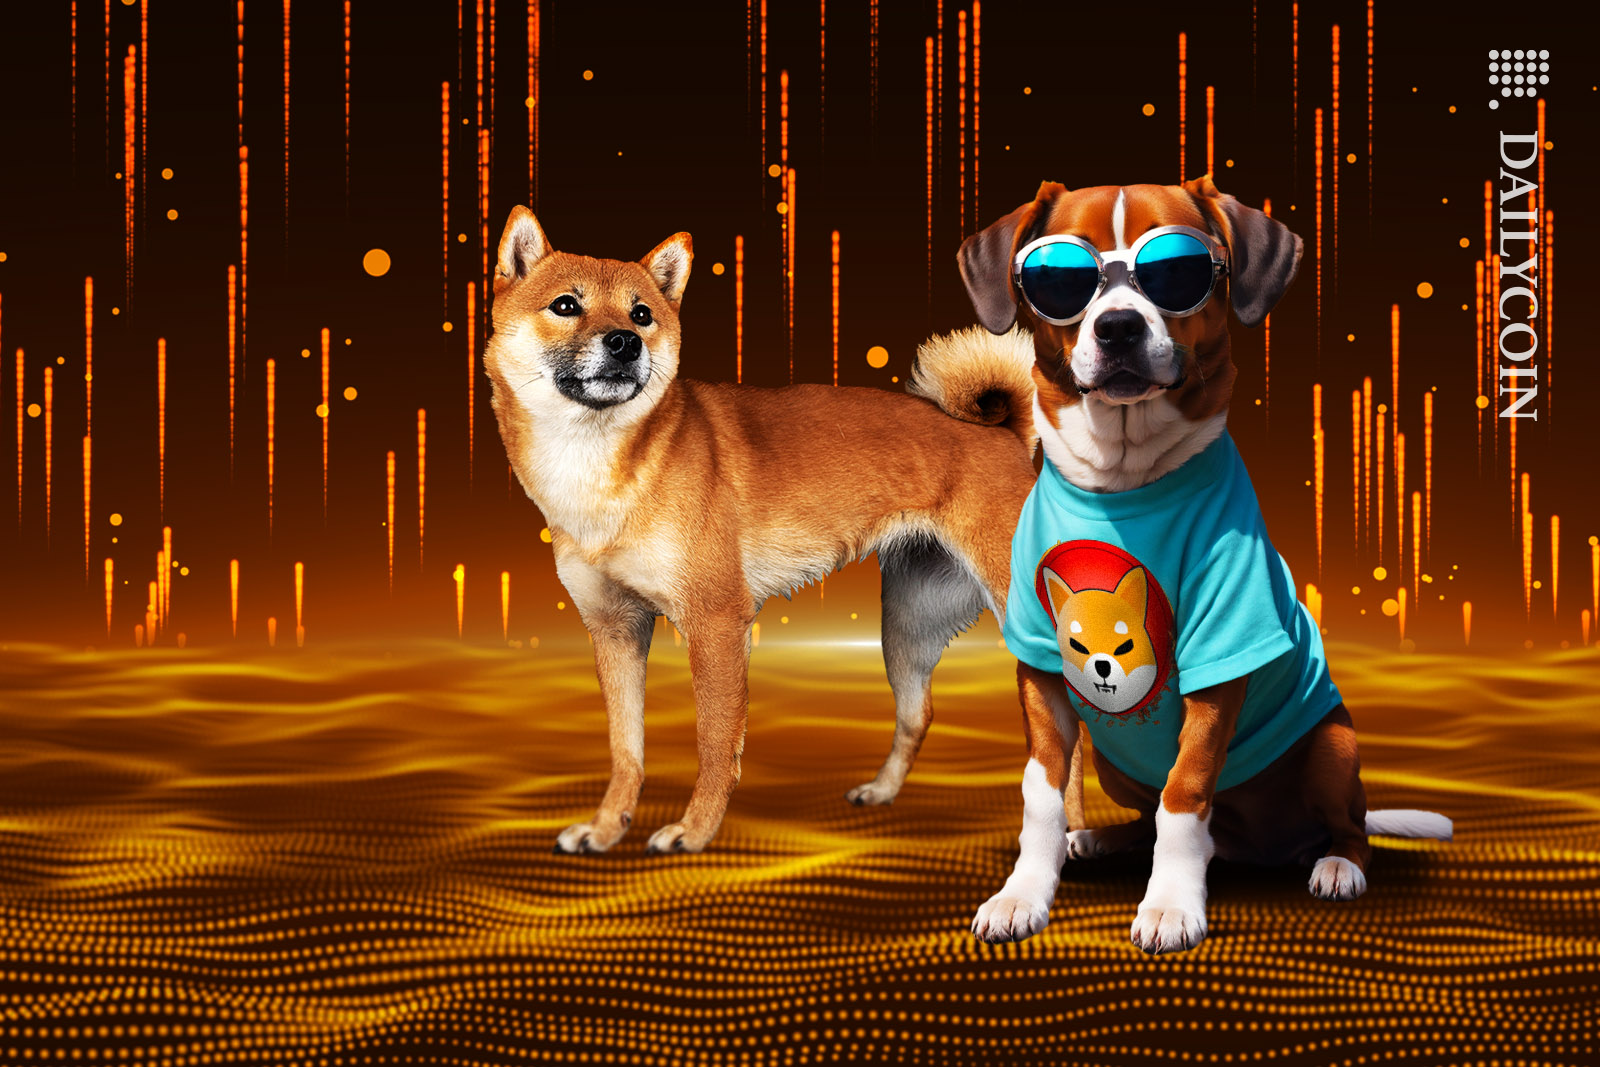 Shiba Inu and his DEV watches the transactions go up.